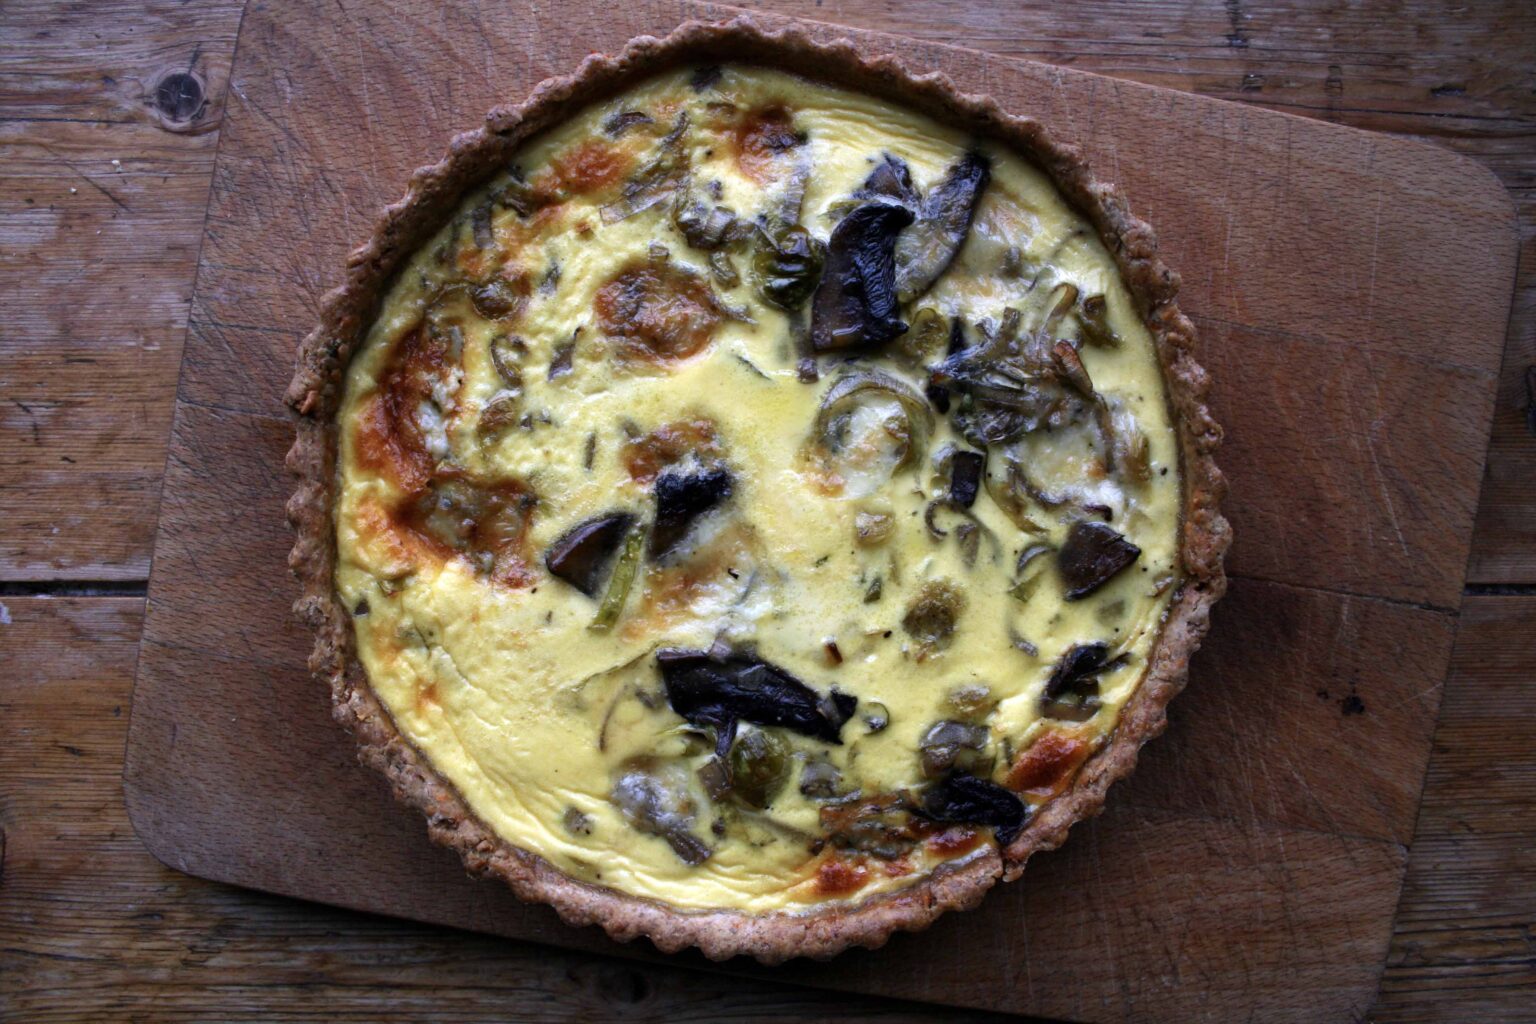 mushroom, Brussels sprouts and blue cheese quiche - Dom in the Kitchen